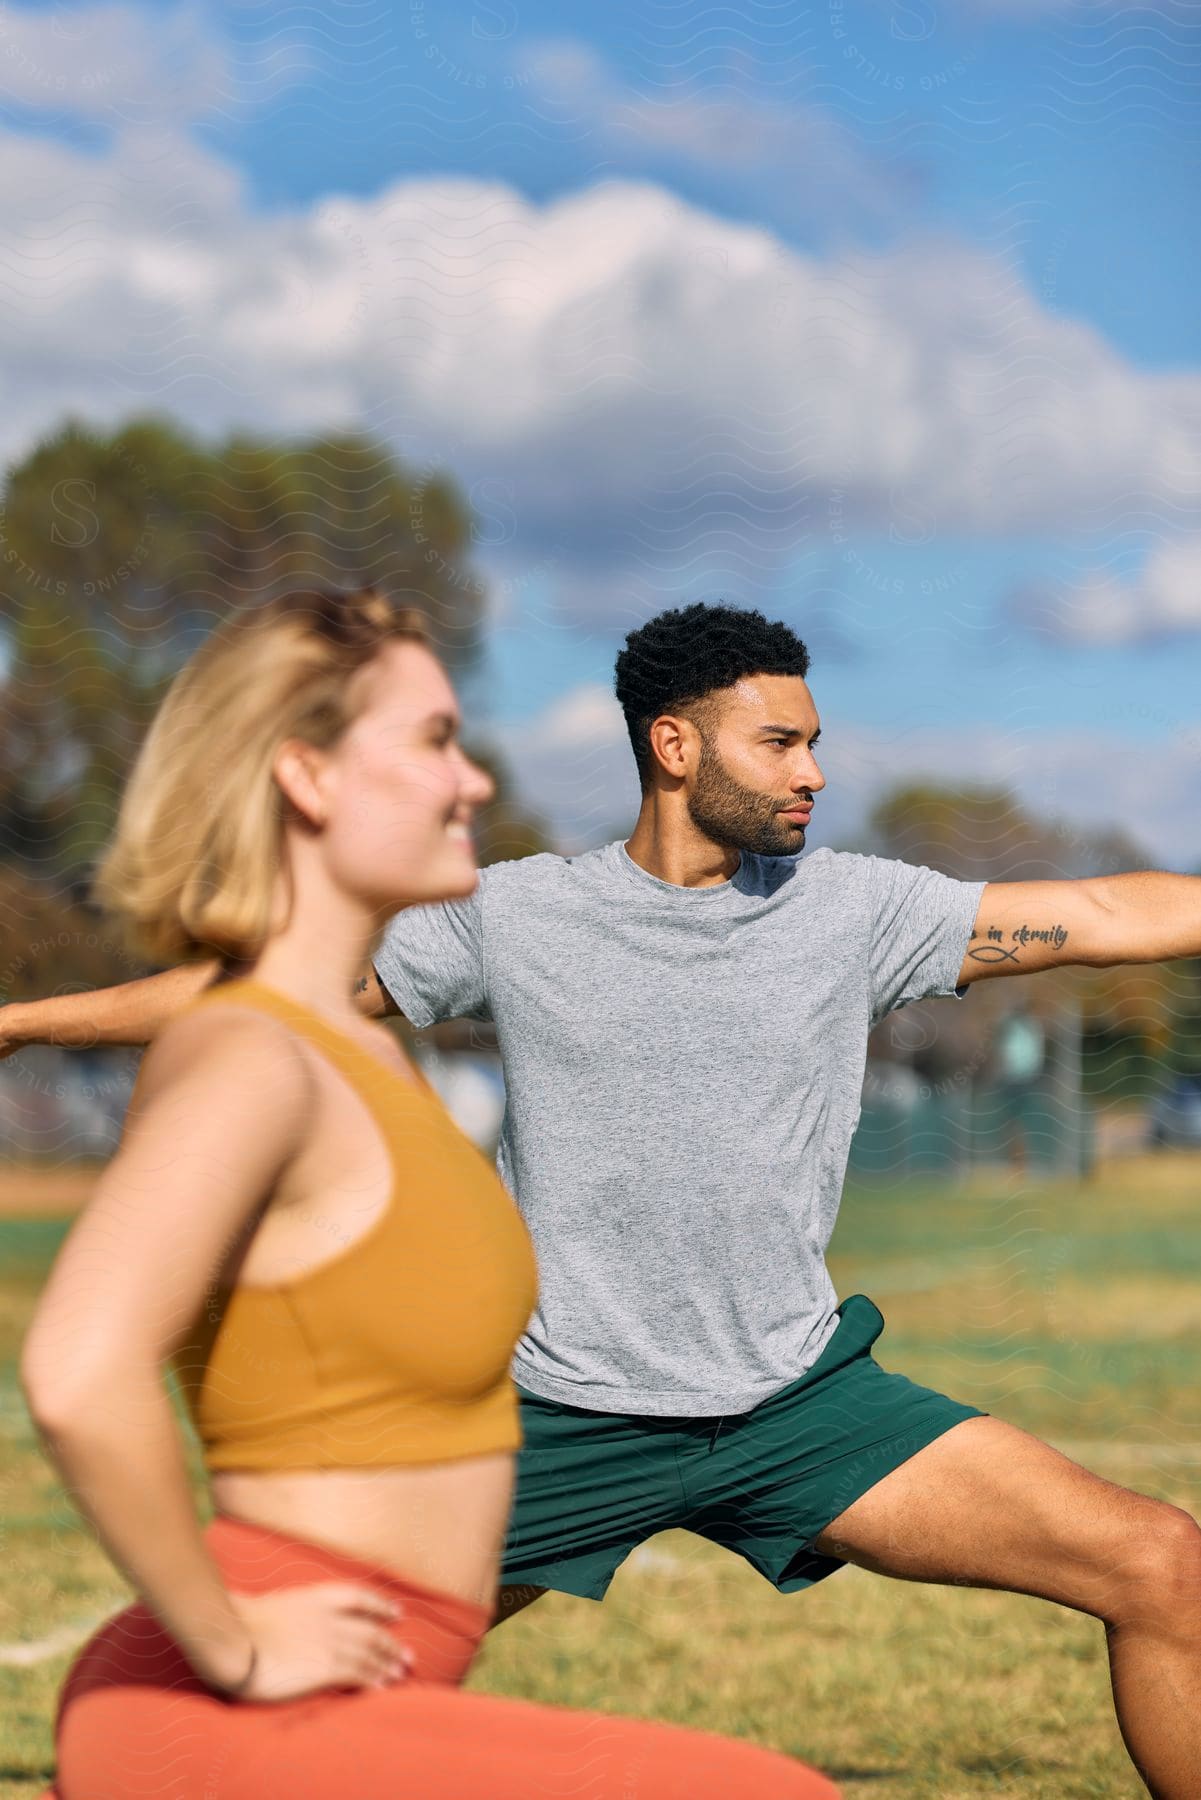 A man and woman stretching on an athletic field.